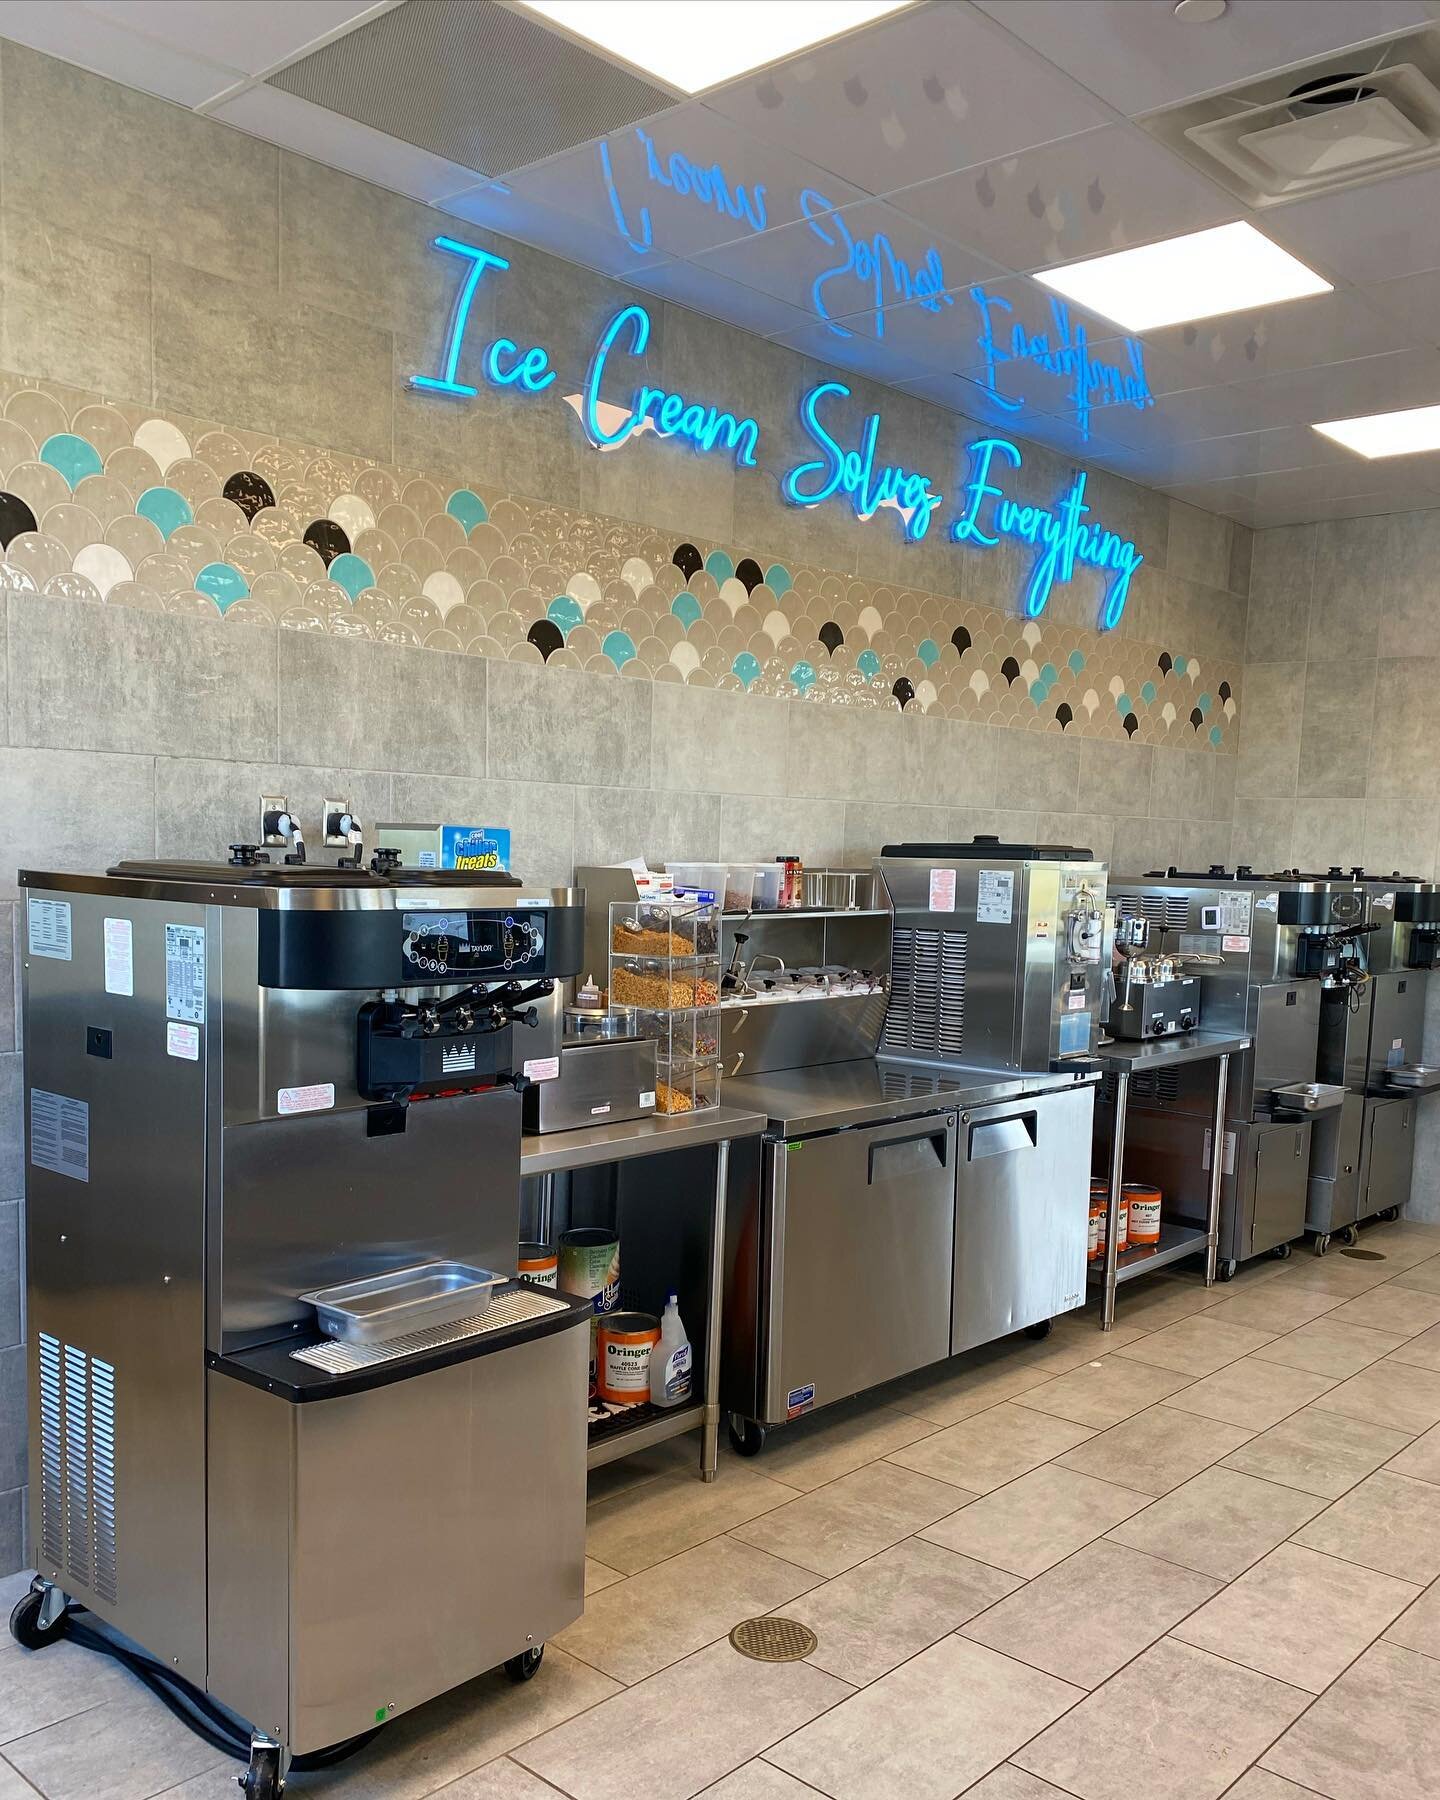 In the Syracuse area?? Check out this beautiful new ice cream shop!! @little_jammers_ice_cream #icecream #syracuse #softserve #taylormakesthebestsoftserve #coolchiller #flavorburst #sundae #milkshakes